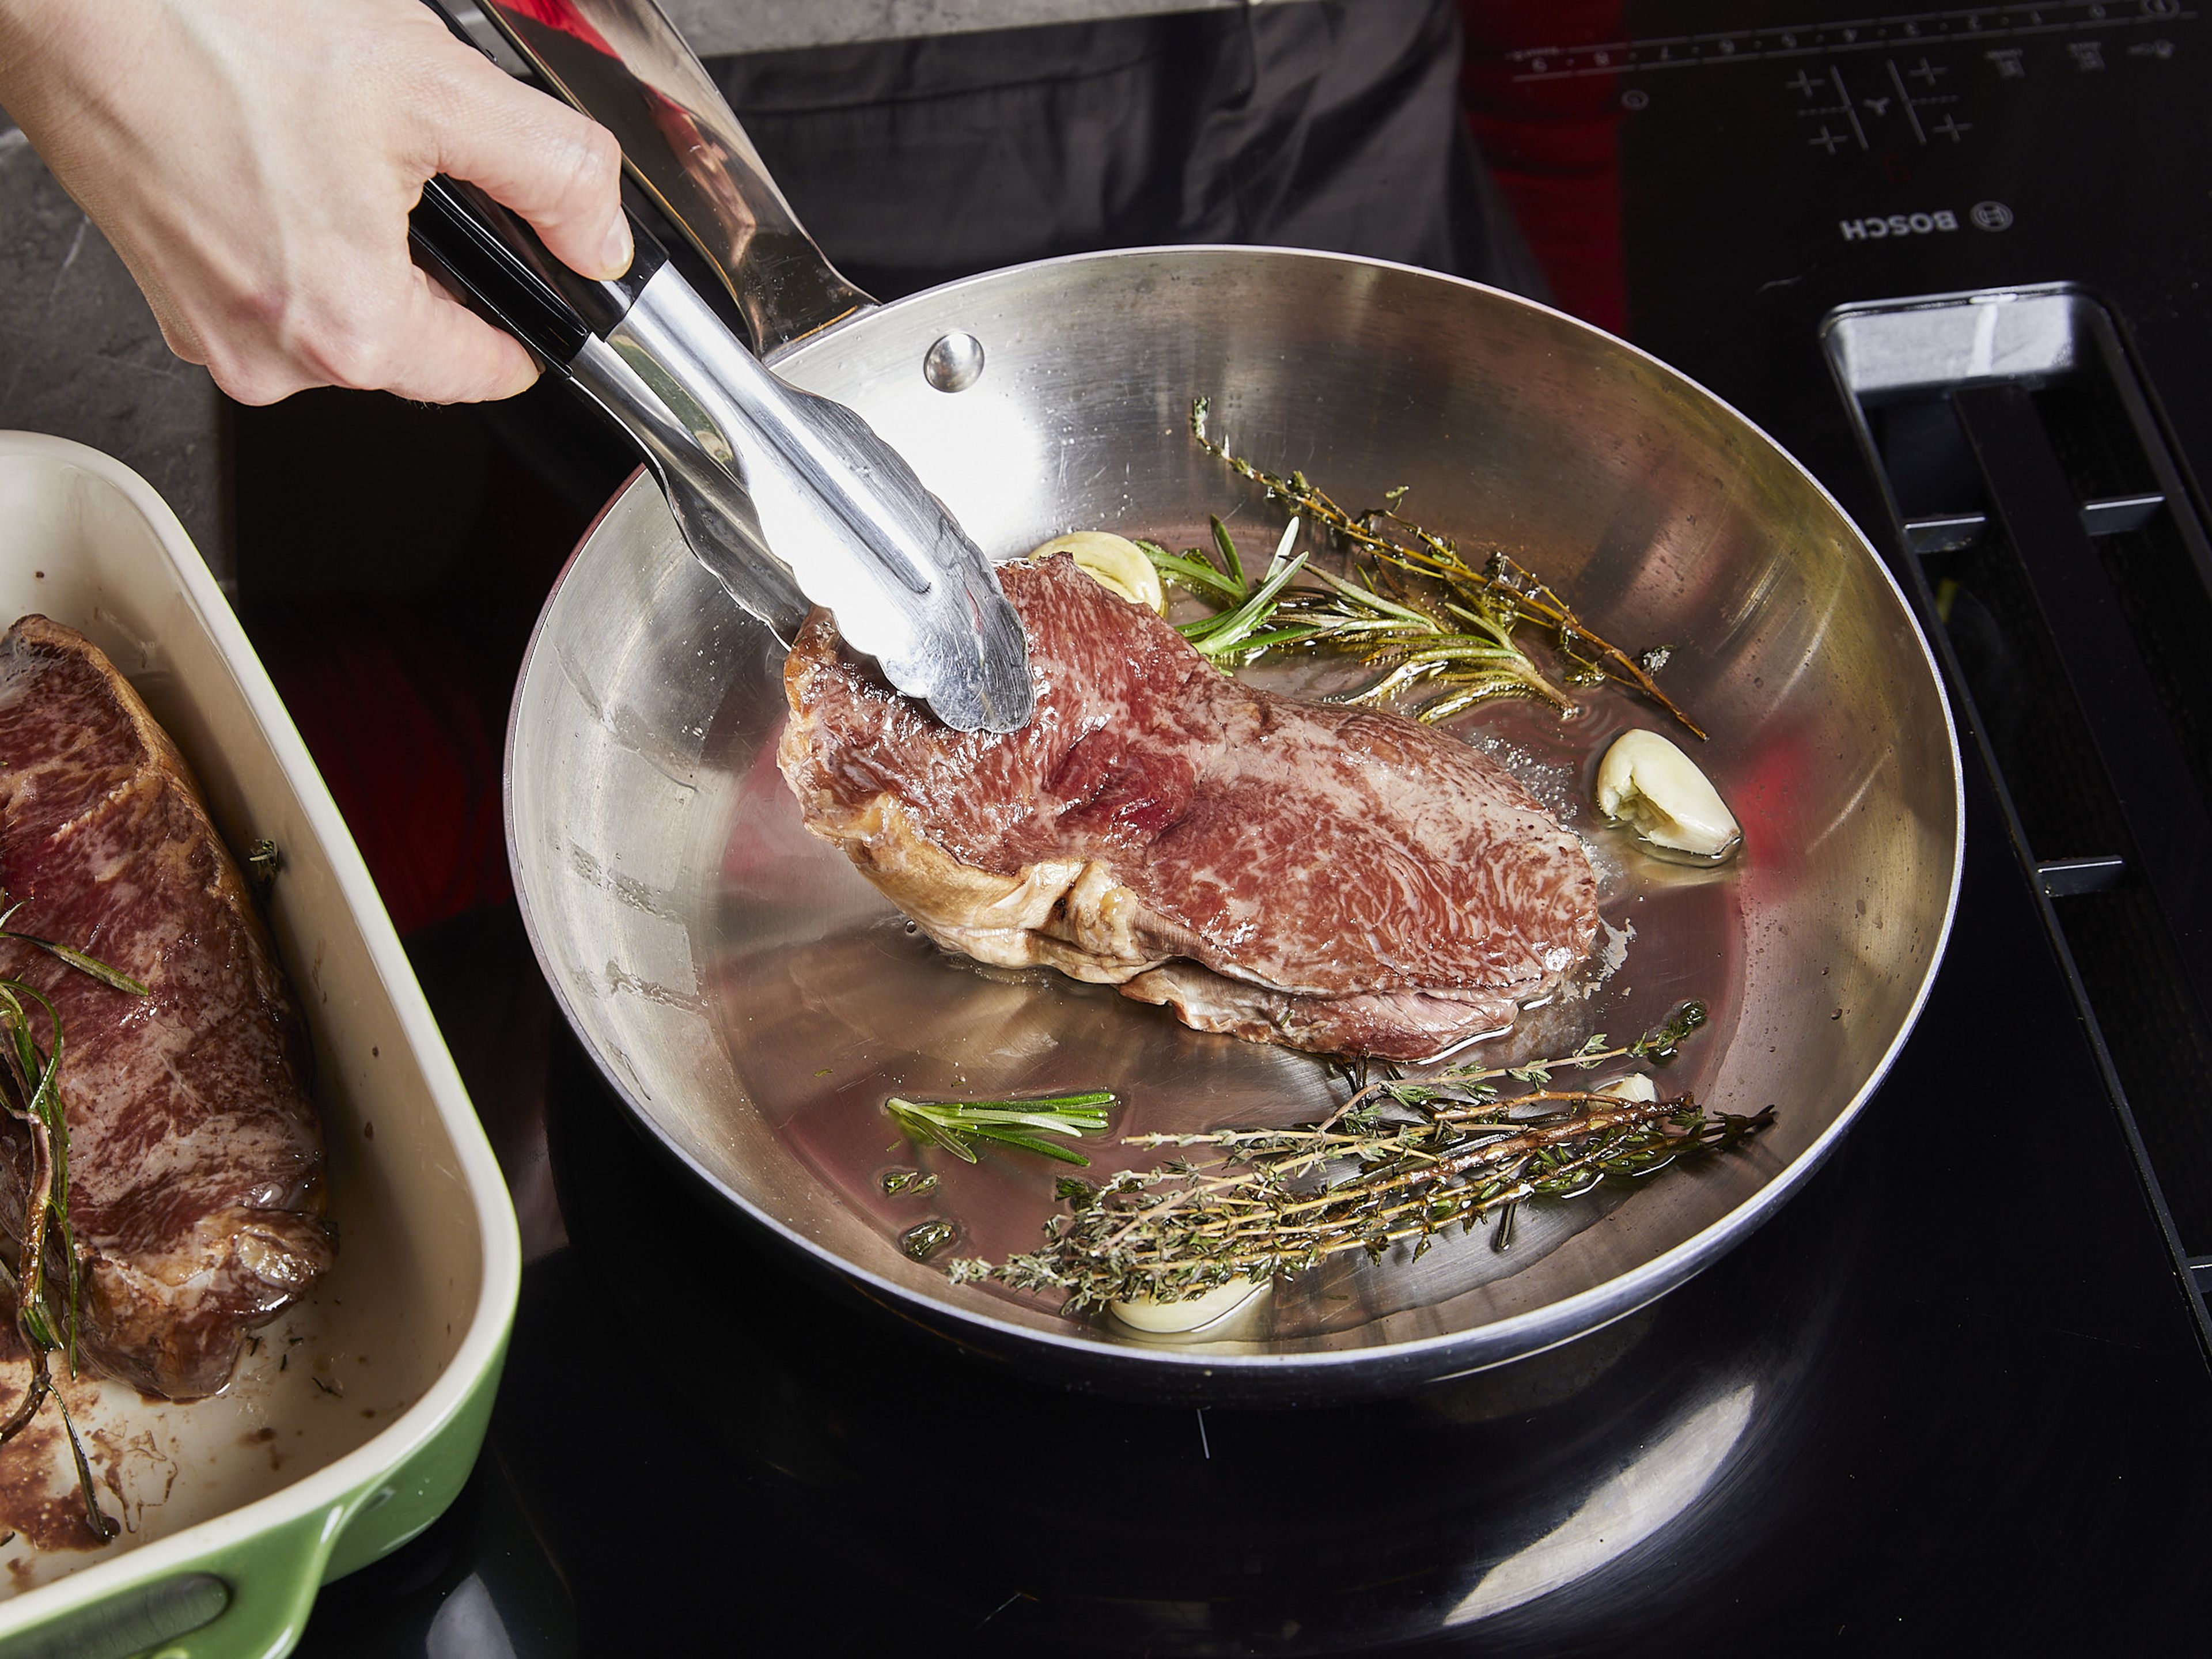 Heat a steel or cast-iron pan over high heat (we do not recommend using a non-stick or Teflon pan). Place the steaks, herbs, and garlic in the pan straight from the oven. Sear for approx. 2 min. on each side, remove and leave to rest for 10–15 min. Enjoy!